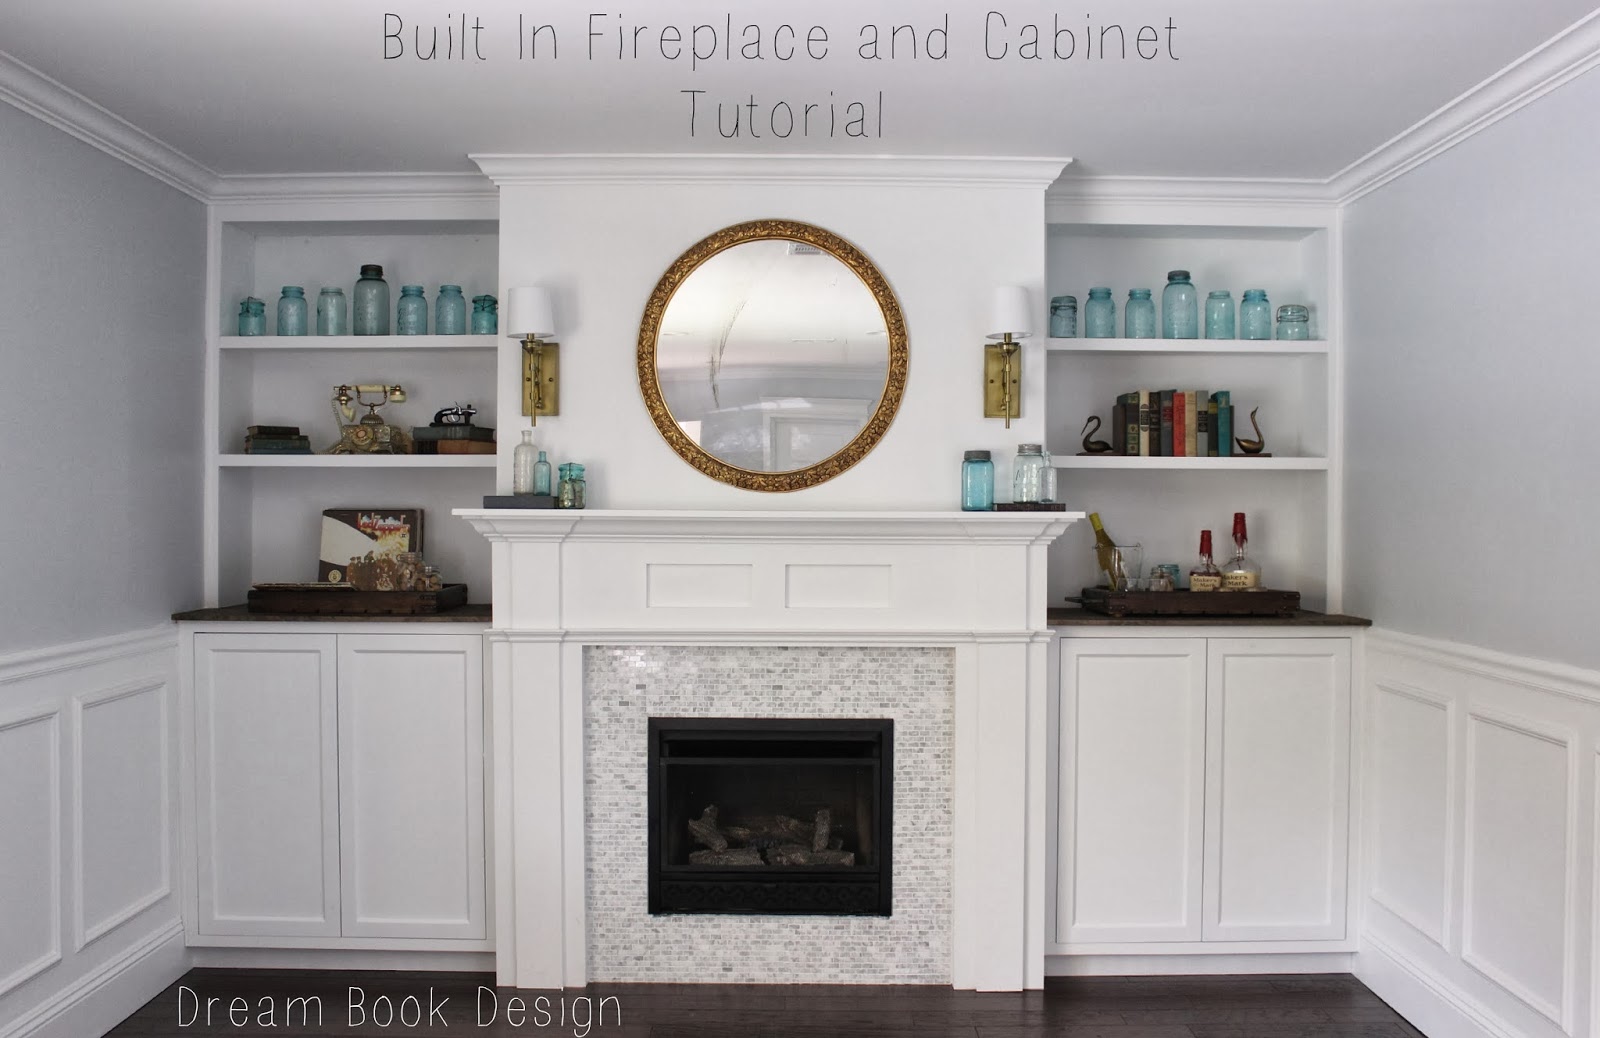 Fireplace And Cabinets Tutorial, How To Build Built In Bookcases Around Fireplace